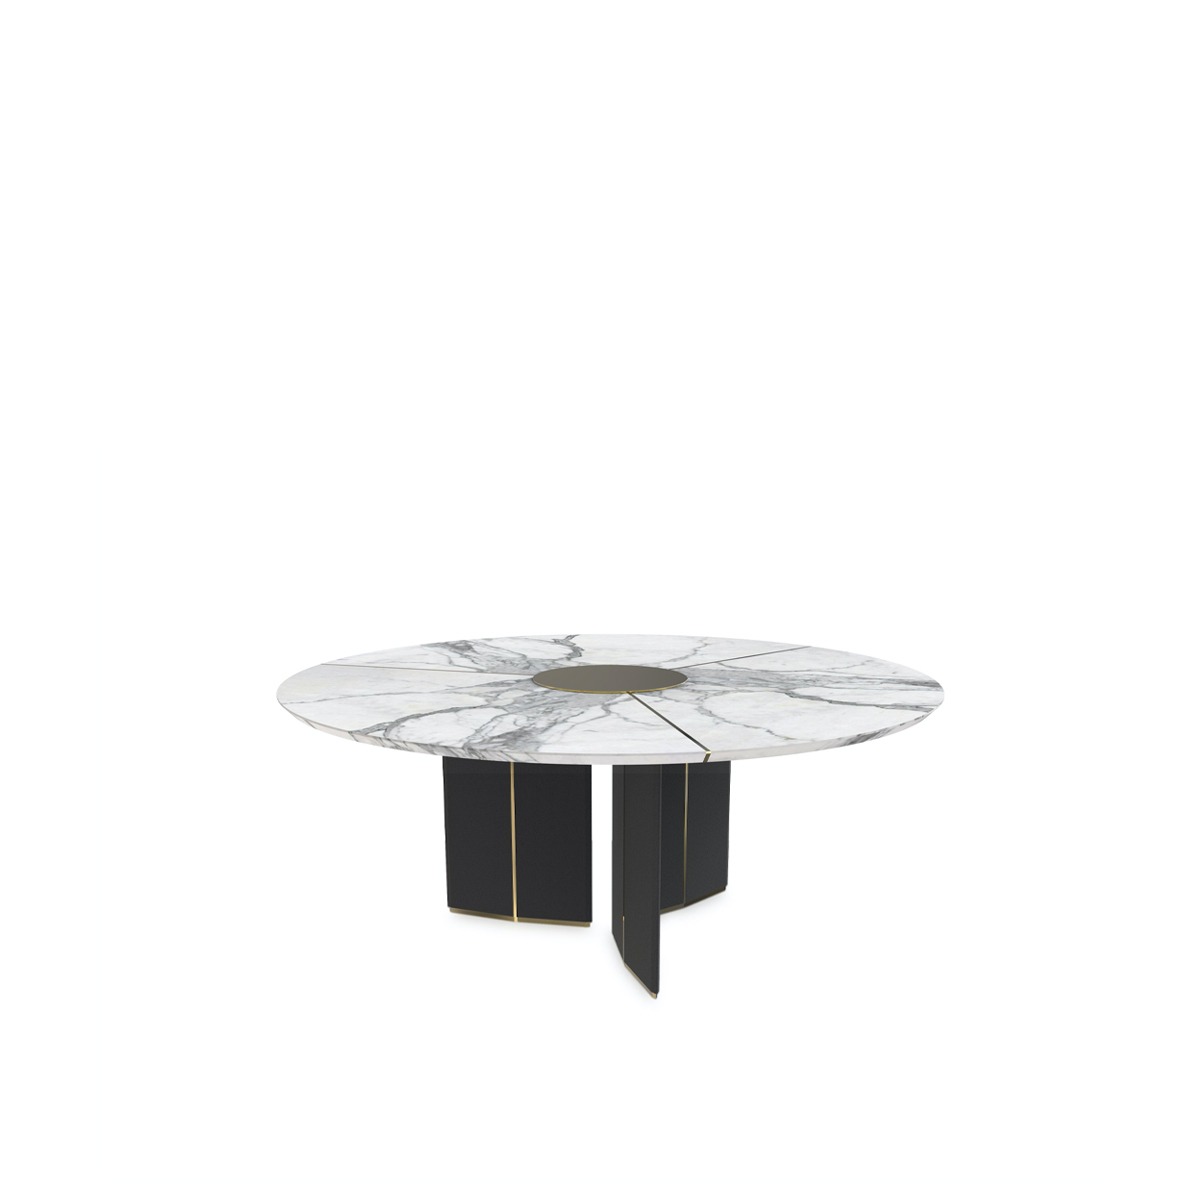 alegrone-dining-table_luxxu_covet-house_2